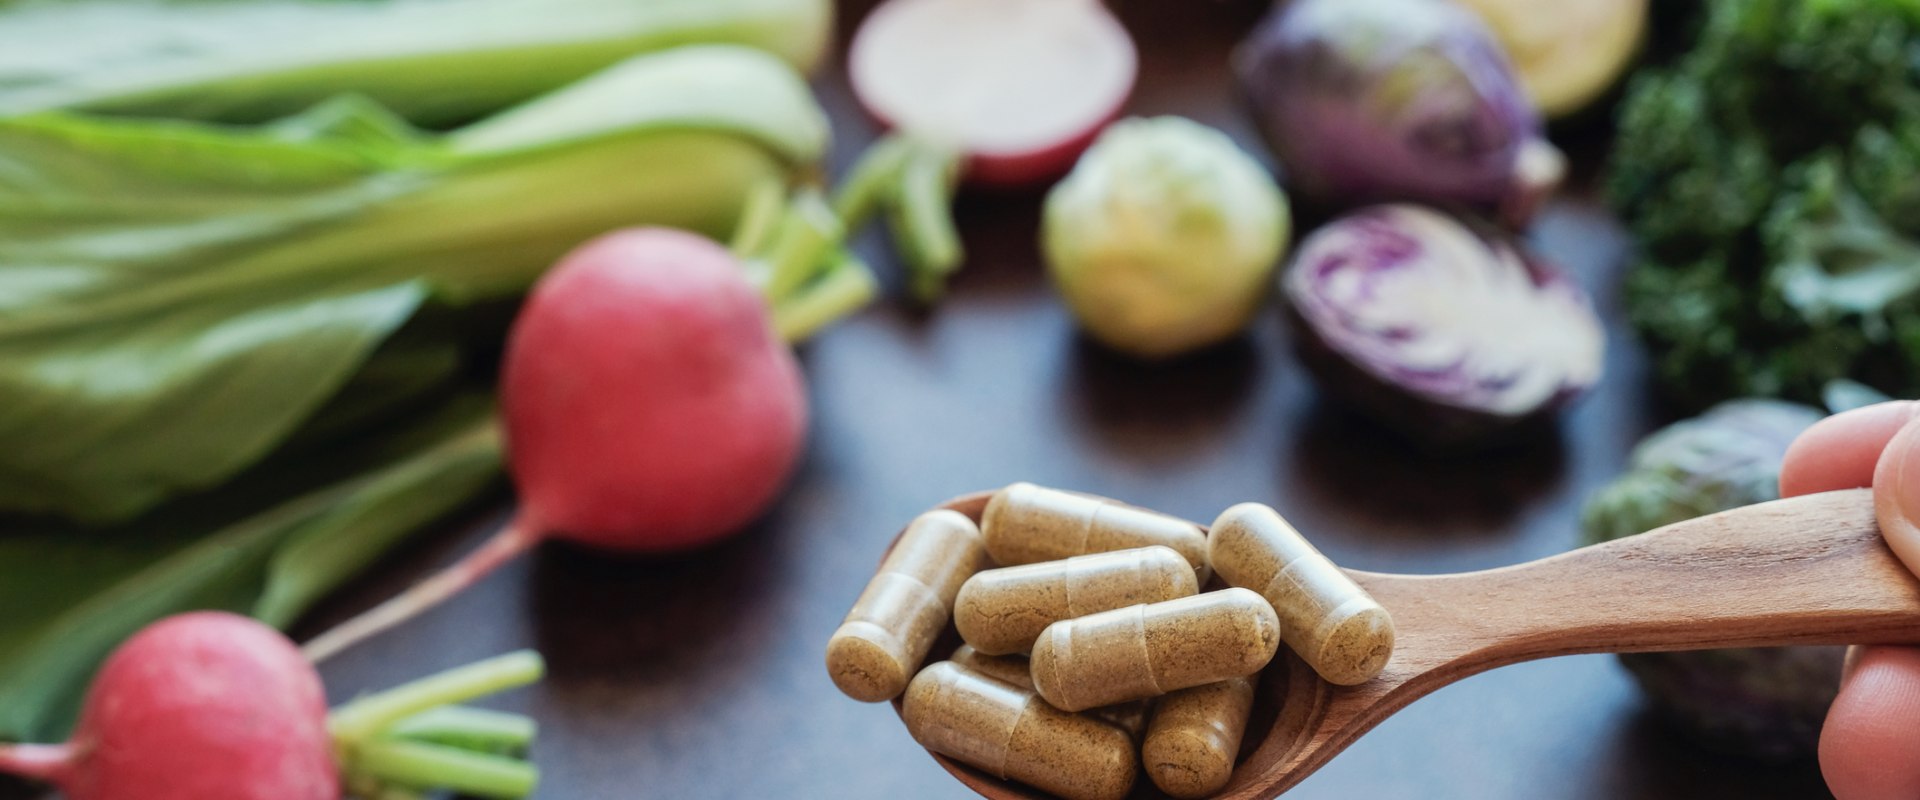 The Essential Guide to Dietary Supplements: Do's and Don'ts